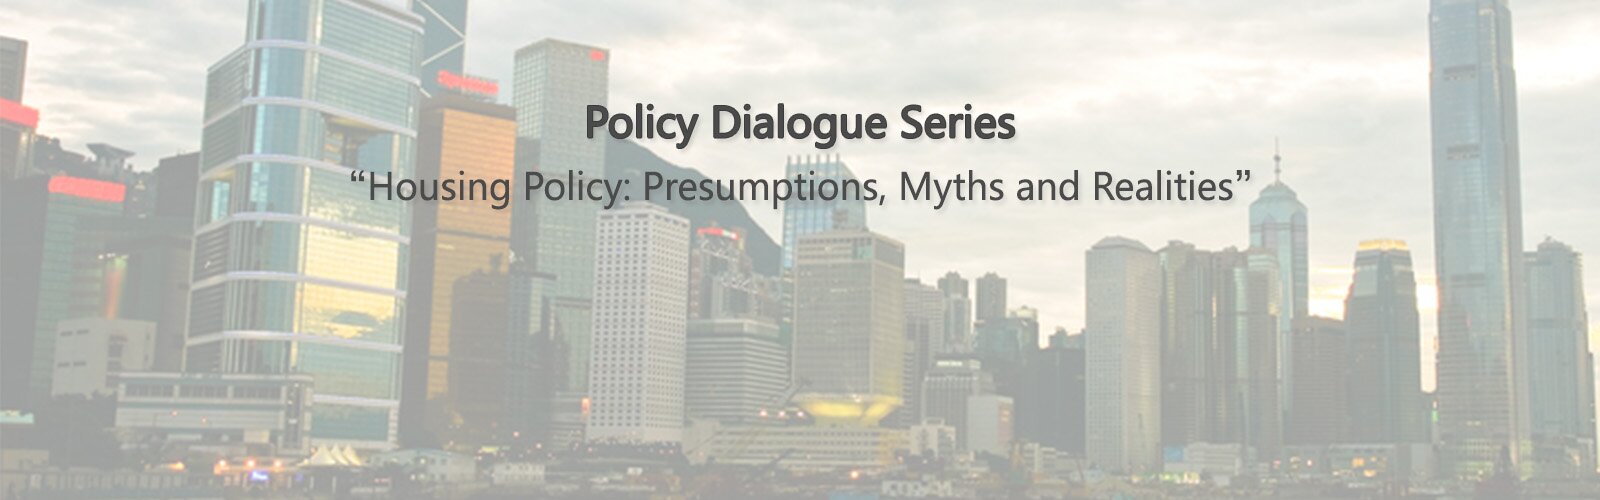 Policy Dialogue – Housing Policy: Presumptions, Myths and Realities